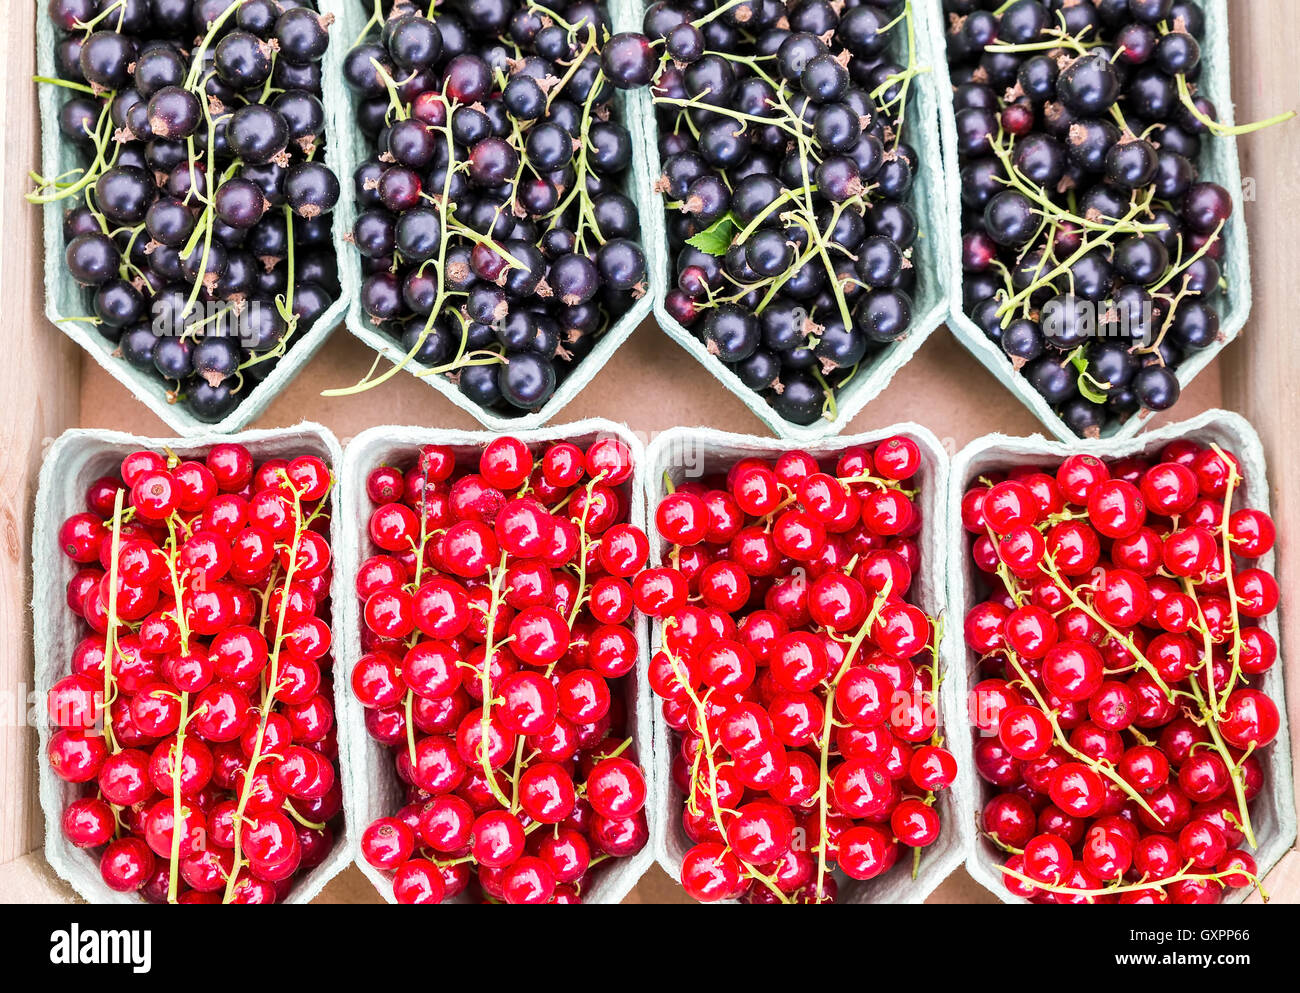 Fruit baskets with red berries and black currants on market Stock Photo